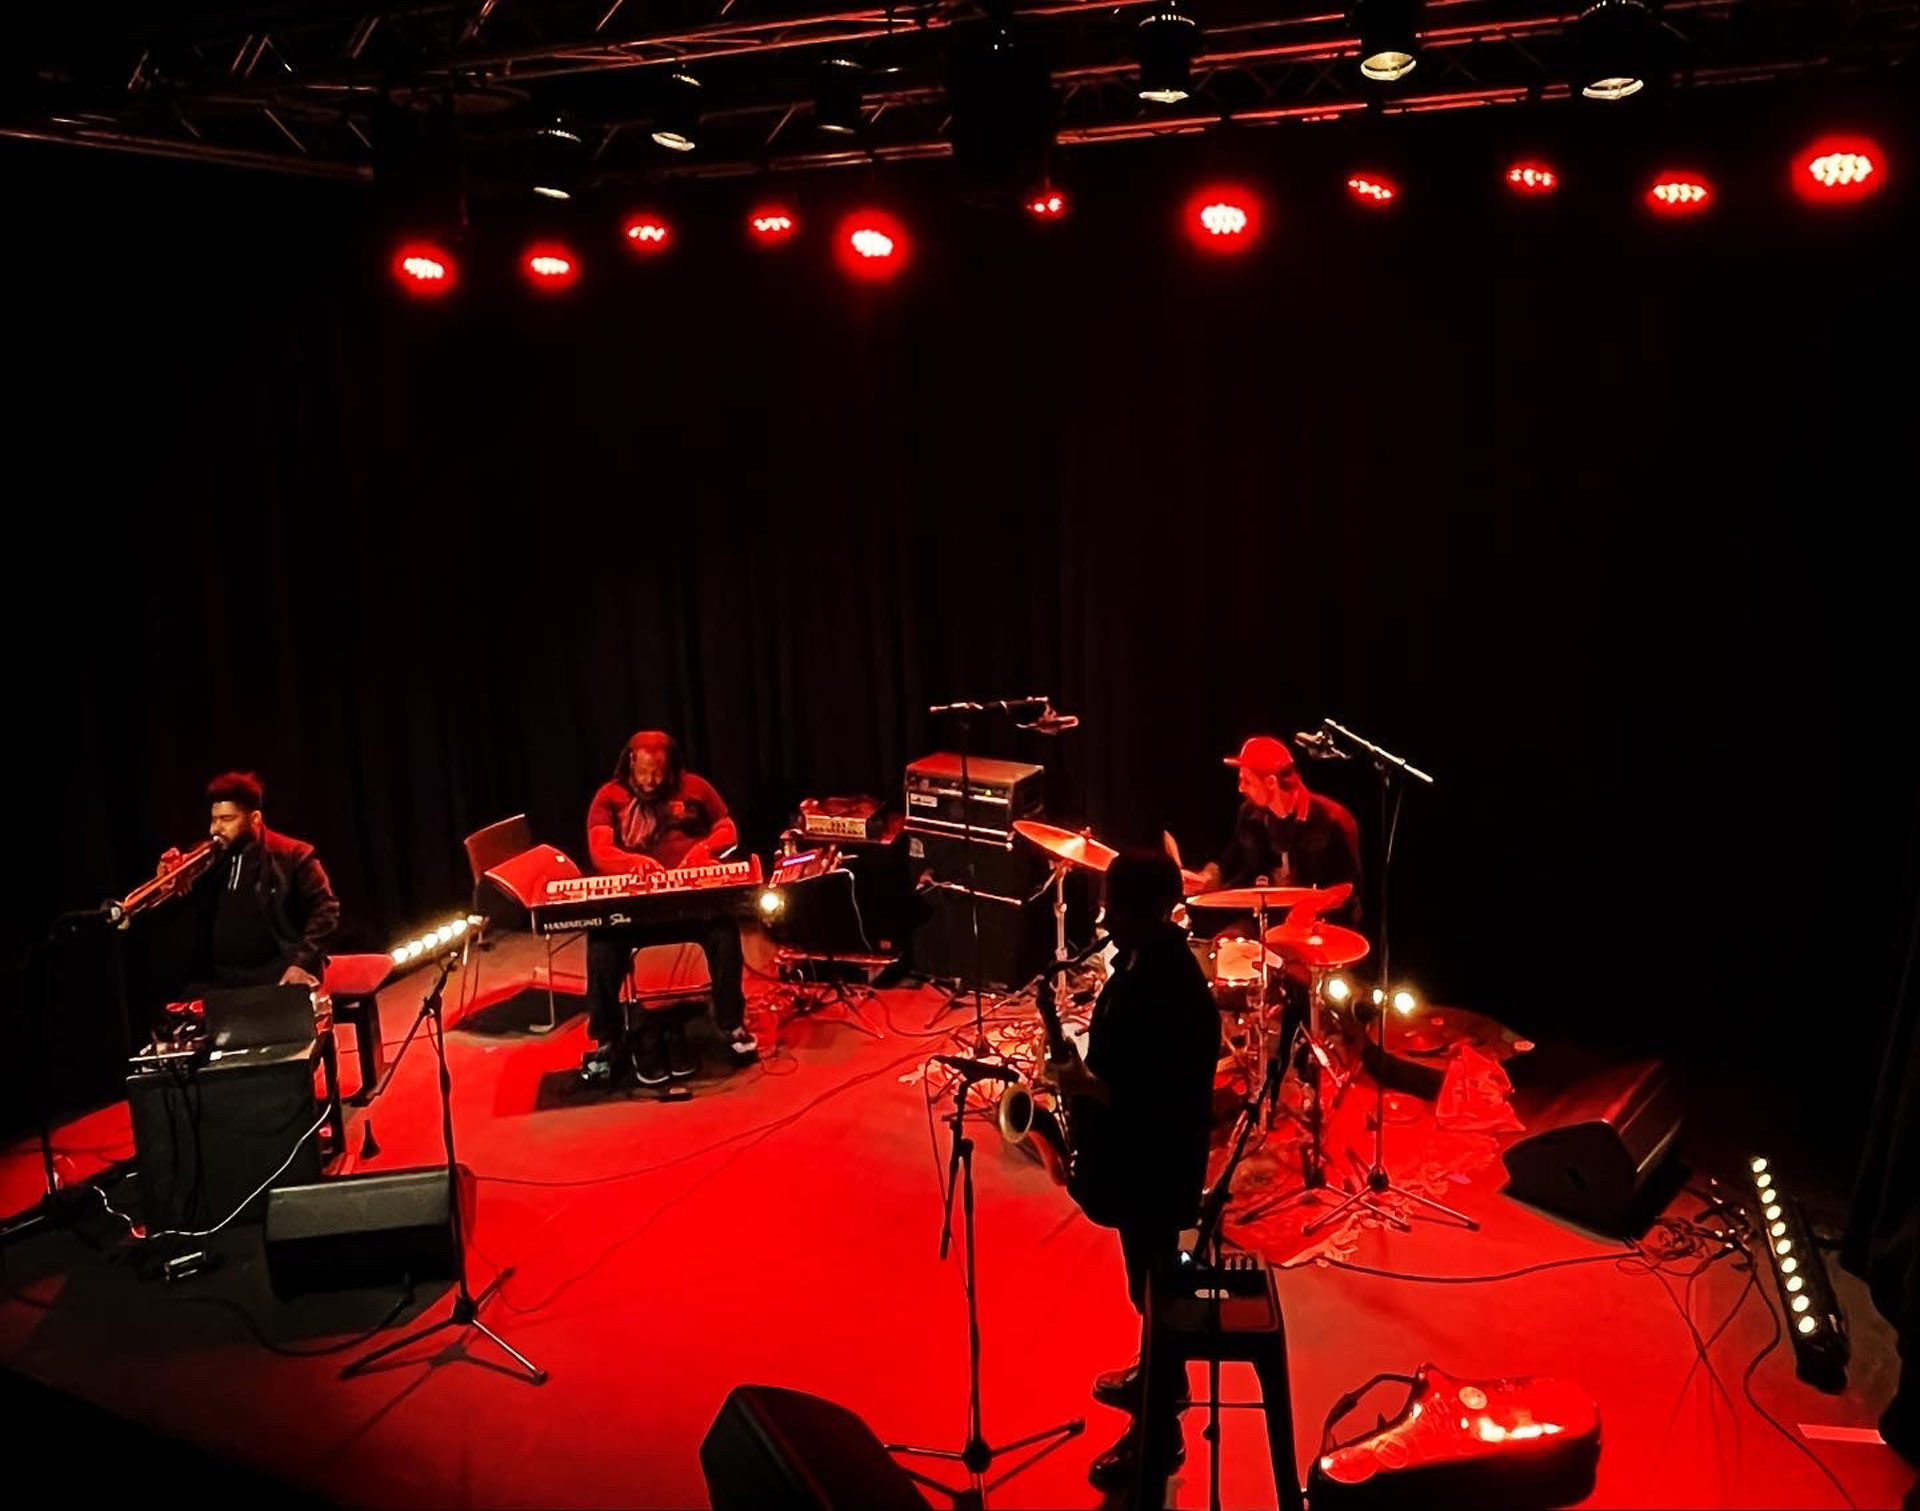 four musicians on stage with red lighting